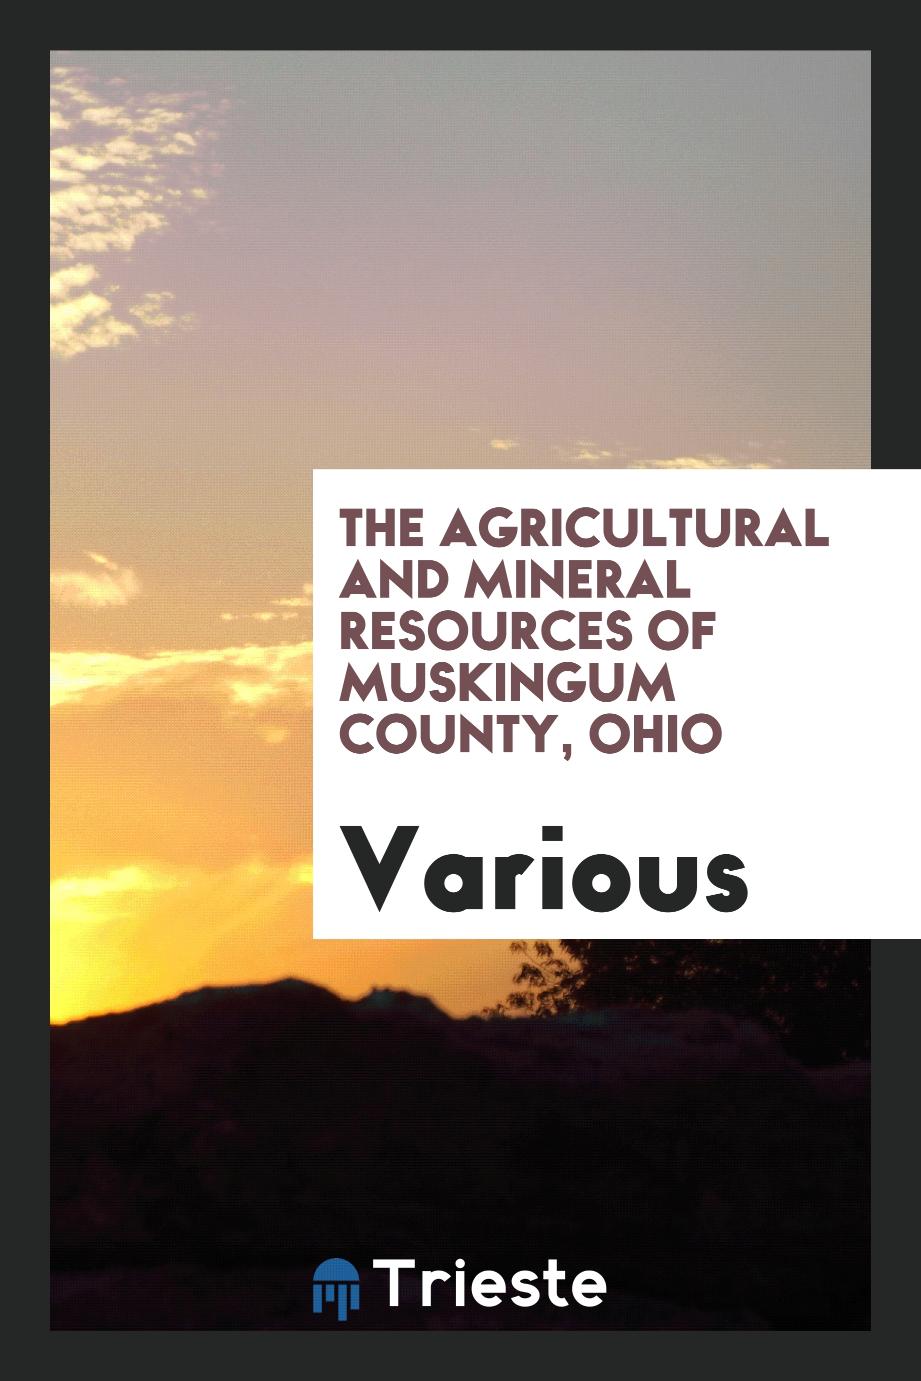 The Agricultural and Mineral Resources of Muskingum County, Ohio